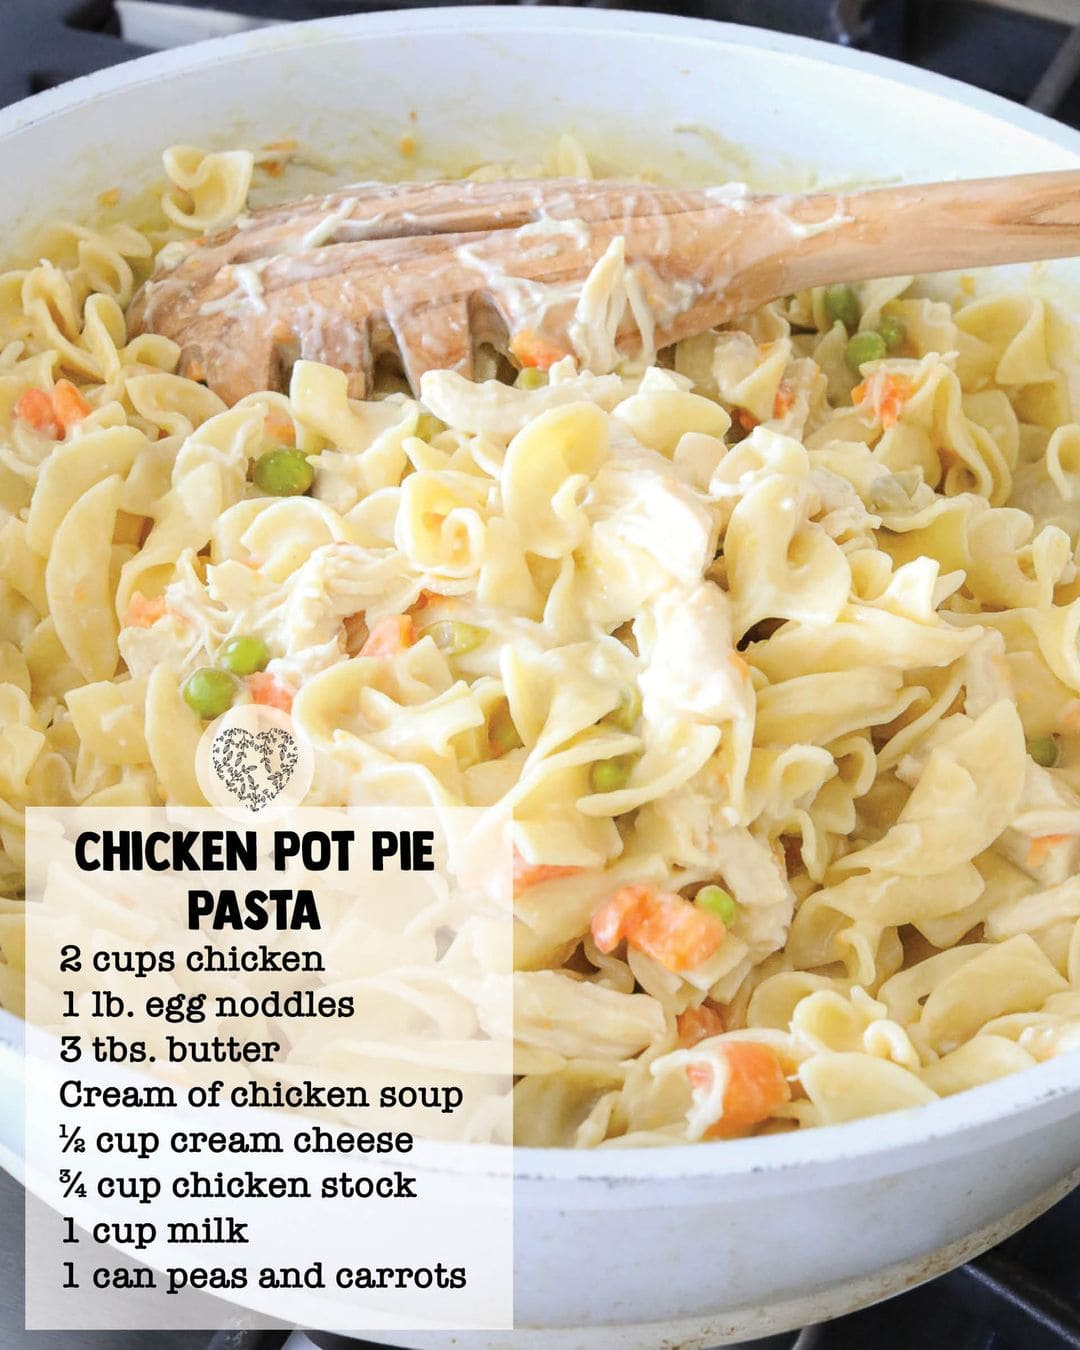 A pot of creamy chicken pot pie pasta with a wooden spoon, featuring cooked noodles, chunks of chicken, peas, and carrots. Ideal for busy families, the recipe list overlays the image in a casual